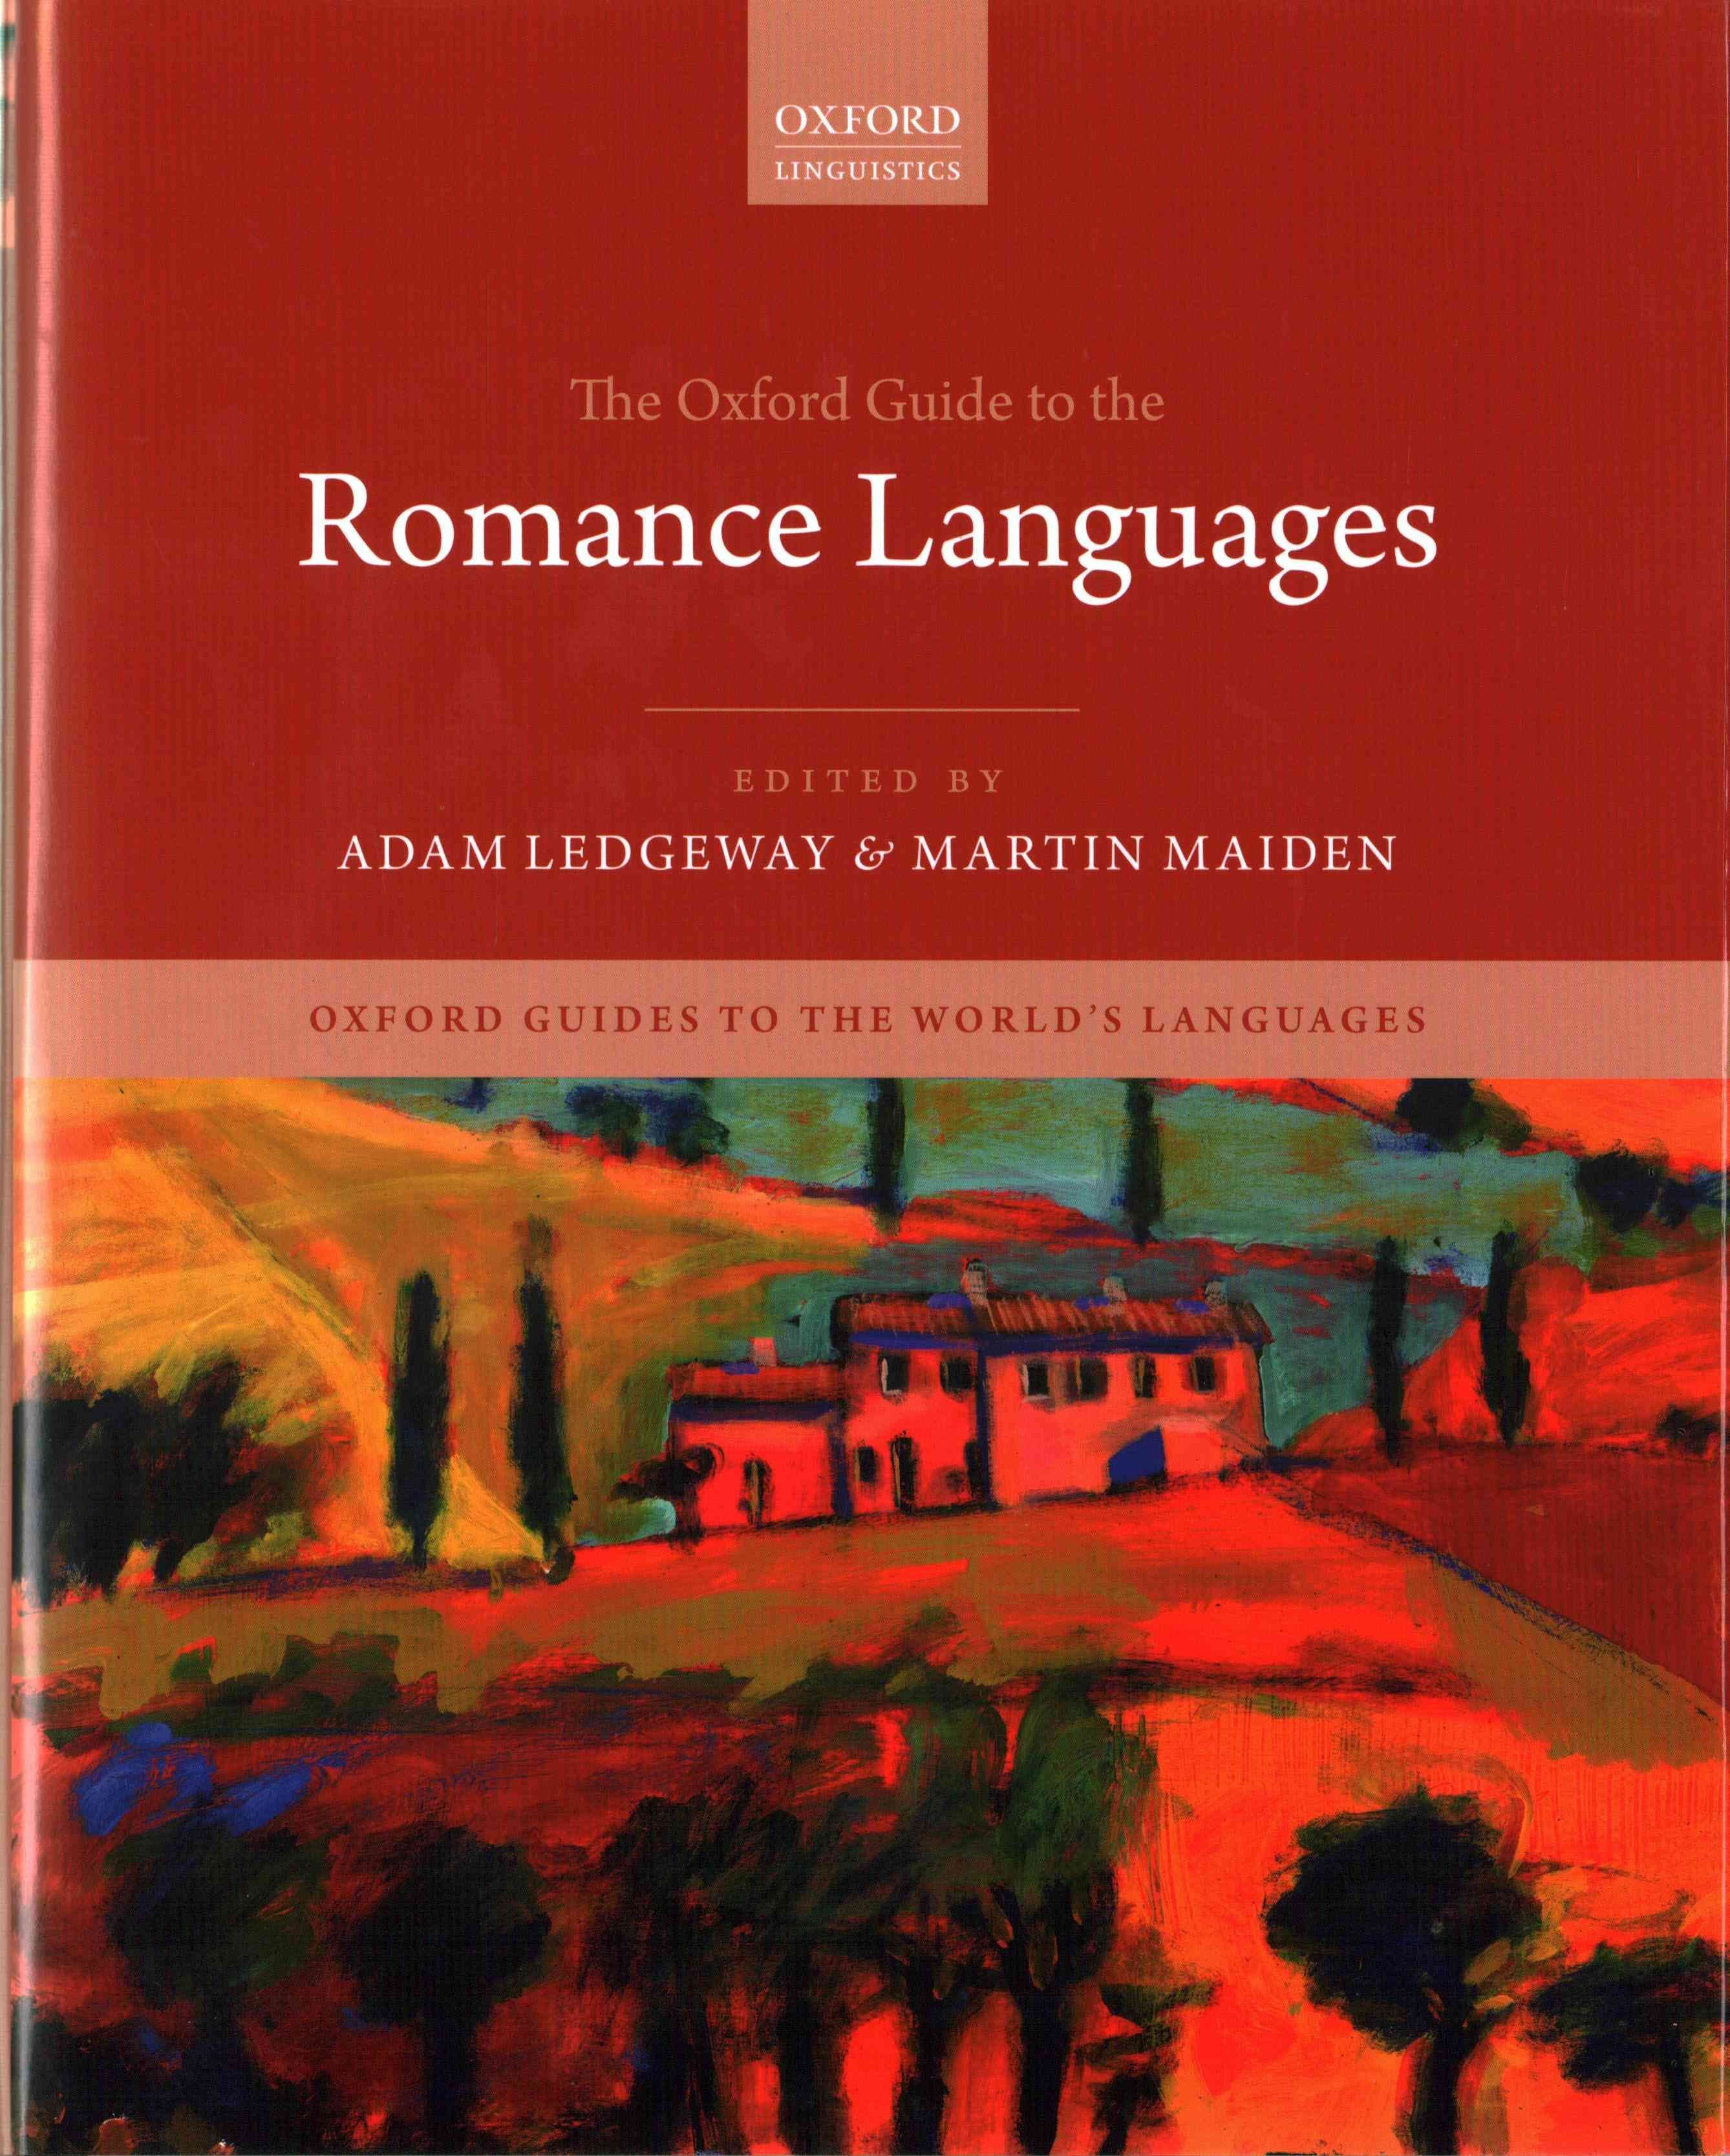 With　Buy　Oxford　the　Languages　Guide　Romance　to　Ledgeway　by　Adam　Free　Delivery